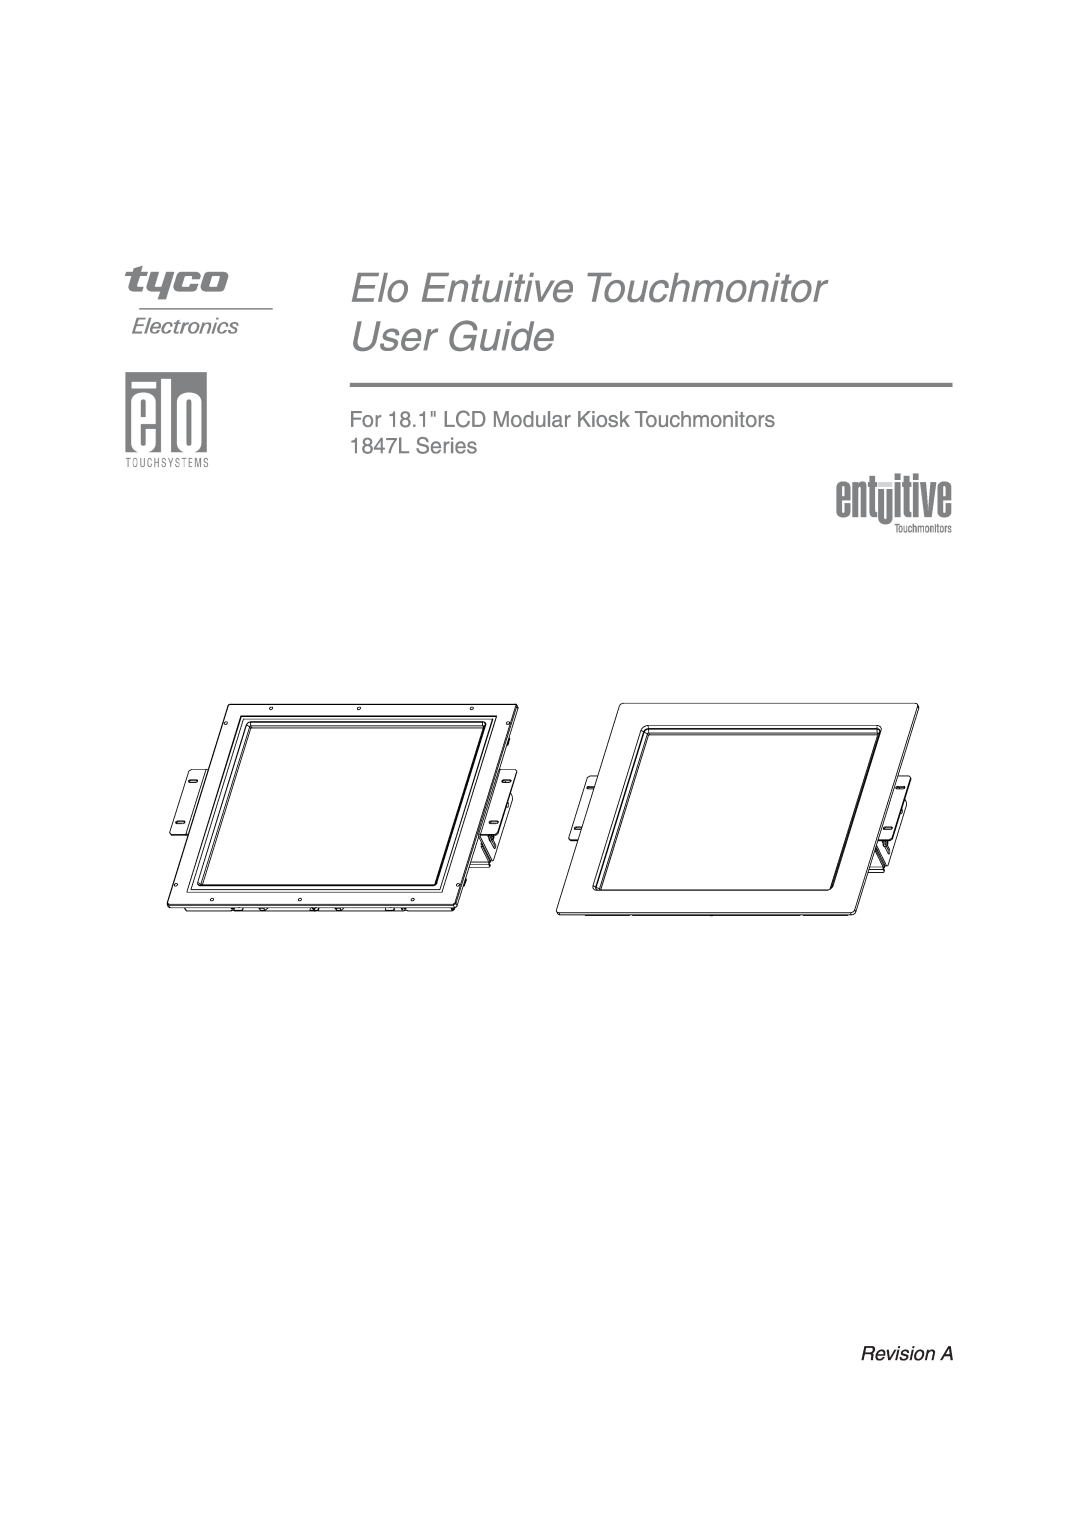 Tyco manual Elo Entuitive Touchmonitor User Guide, For 18.1 LCD Modular Kiosk Touchmonitors 1847L Series, Revision A 